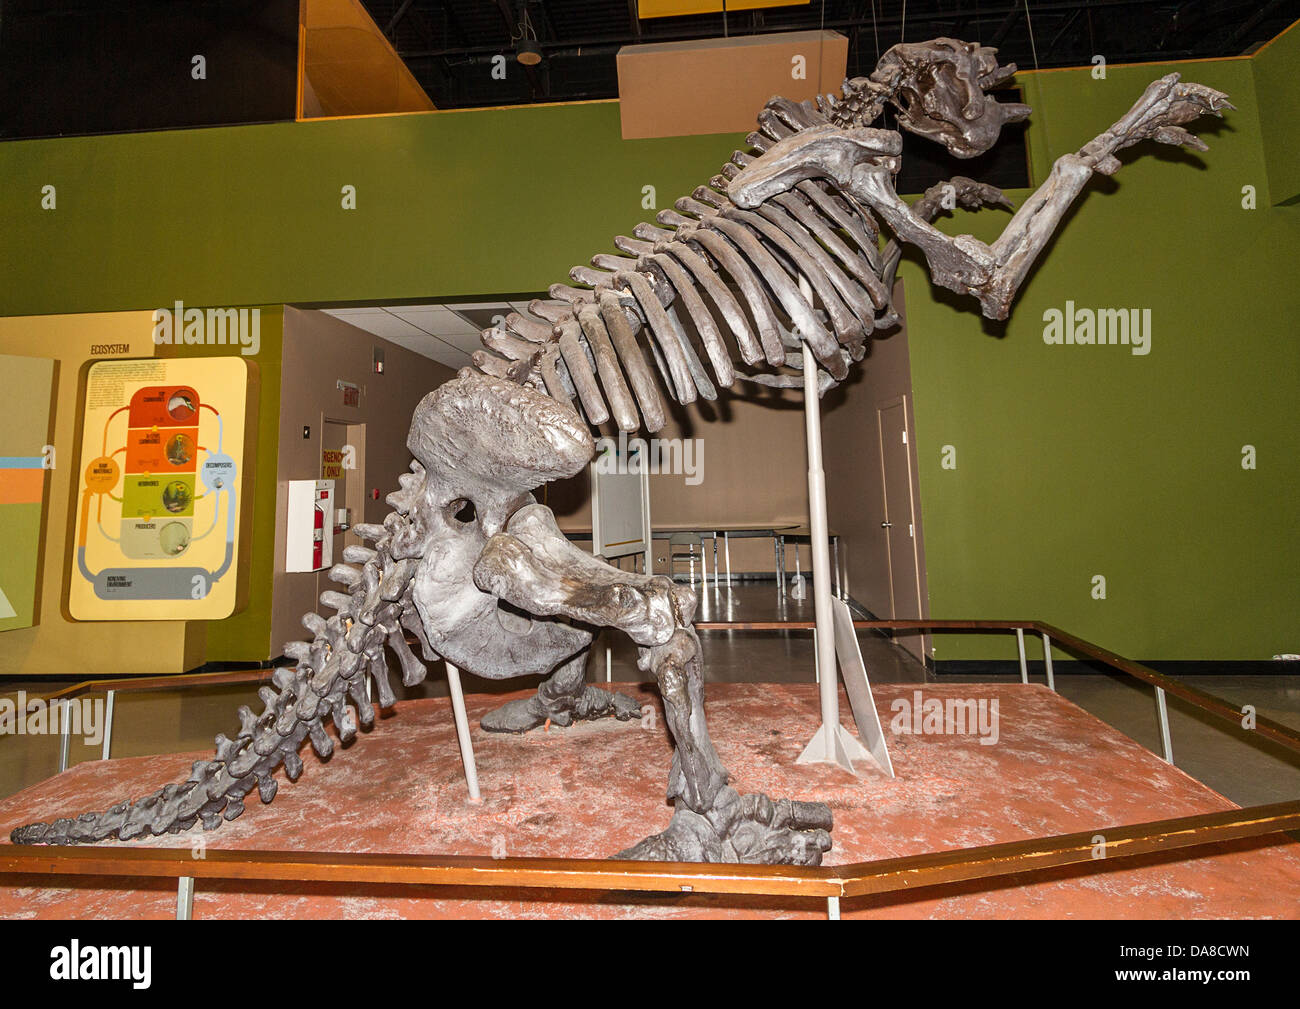 Replica skeleton of megatherium, a ground sloth that lived until 10,000 years ago in Canadian prairies. Manitoba Museum Stock Photo